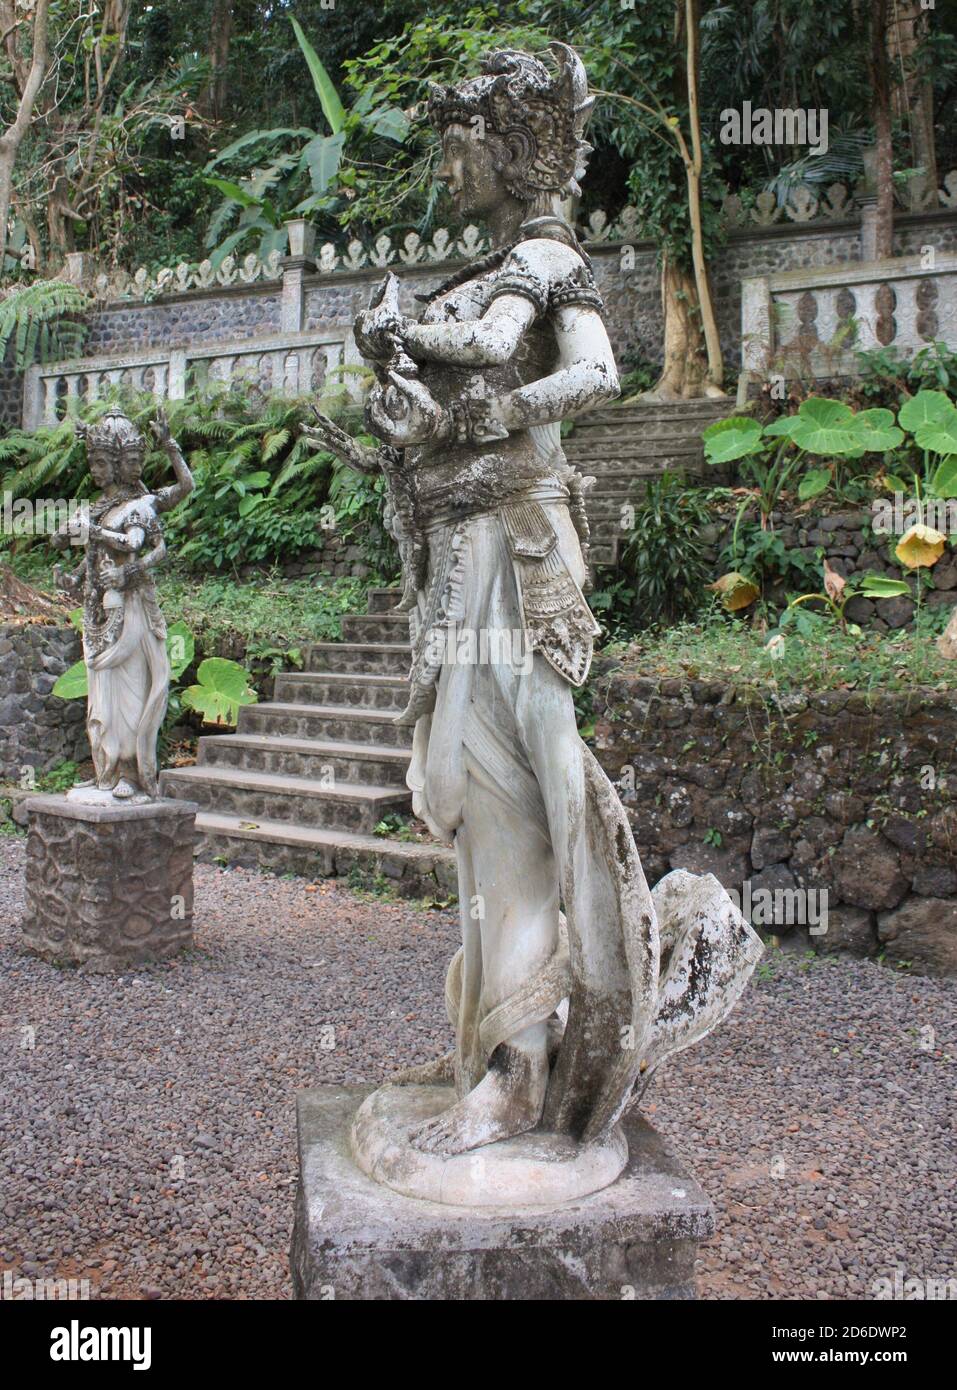 Balinese Stone statues in a scenic outdoor garden in Bali, Indonesia Stock  Photo - Alamy